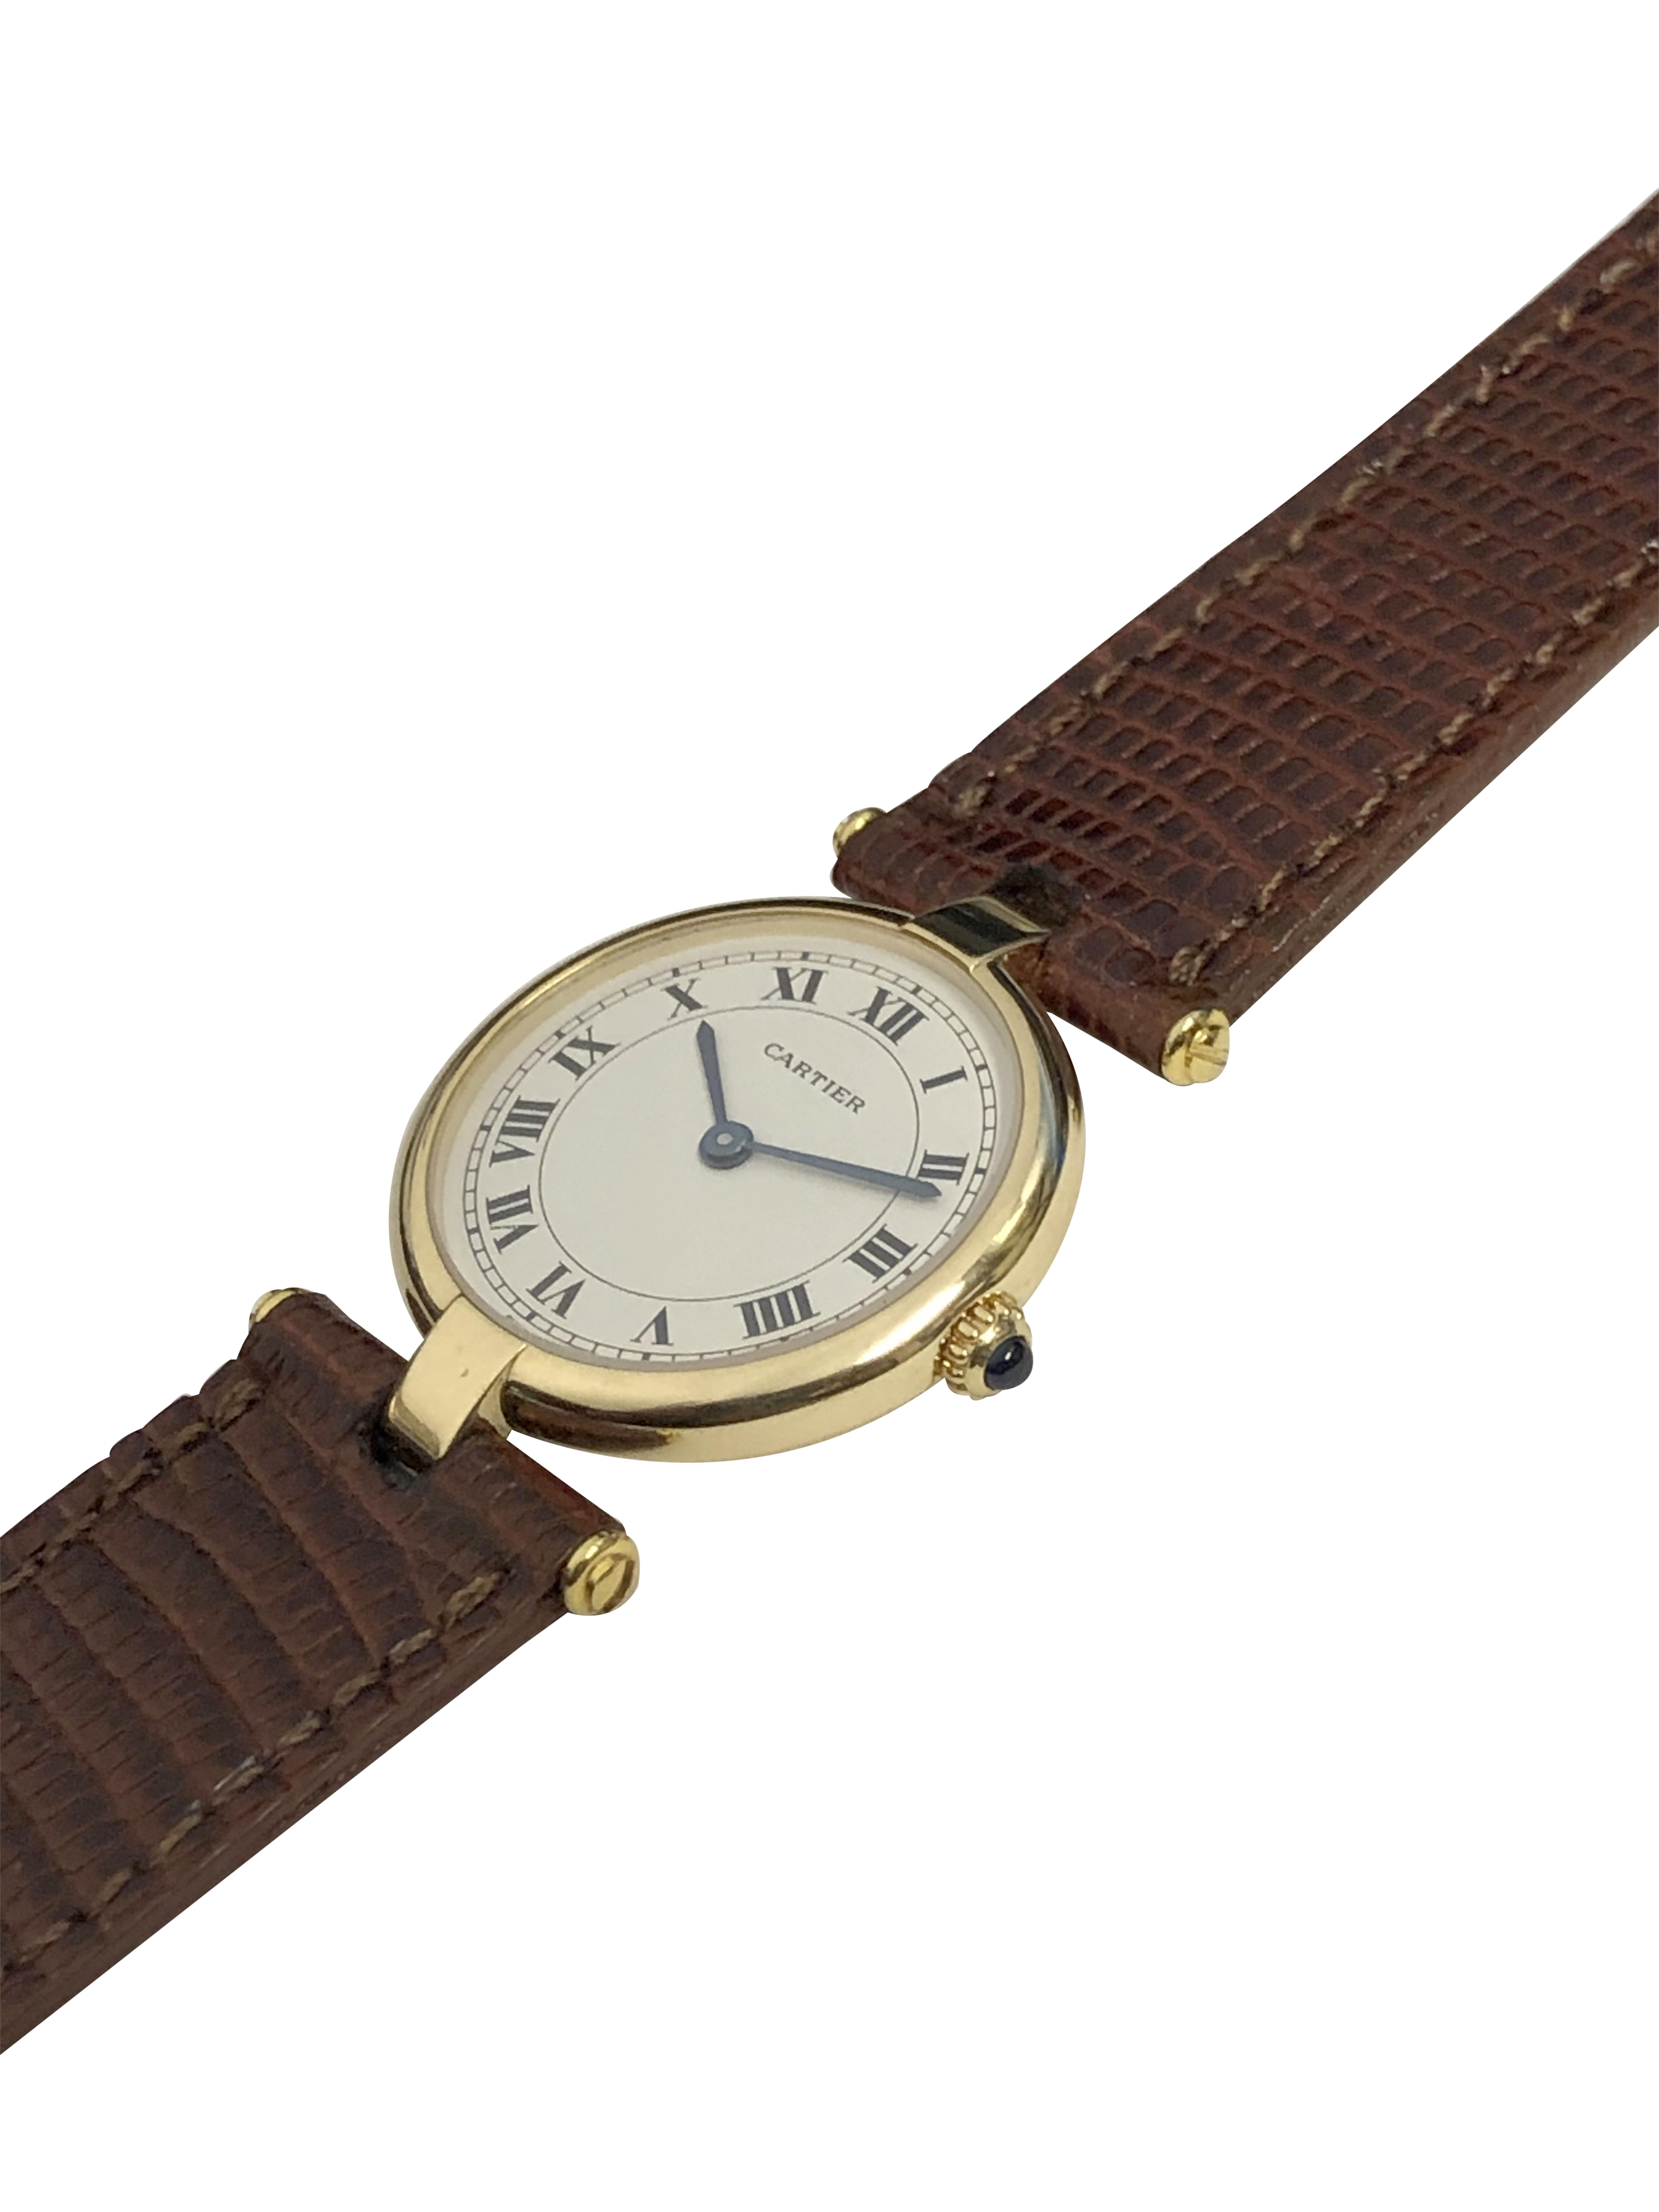 Circa 2000 Cartier Paris Vendome collection Ladies Wrist Watch, 29 M.M. 18K Yellow Gold 2 piece case. Quartz movement, Sapphire set Crown, White dial with Black Roman numerals. New Brown Lizard Strap. Watch length 8 inches. Recently serviced and